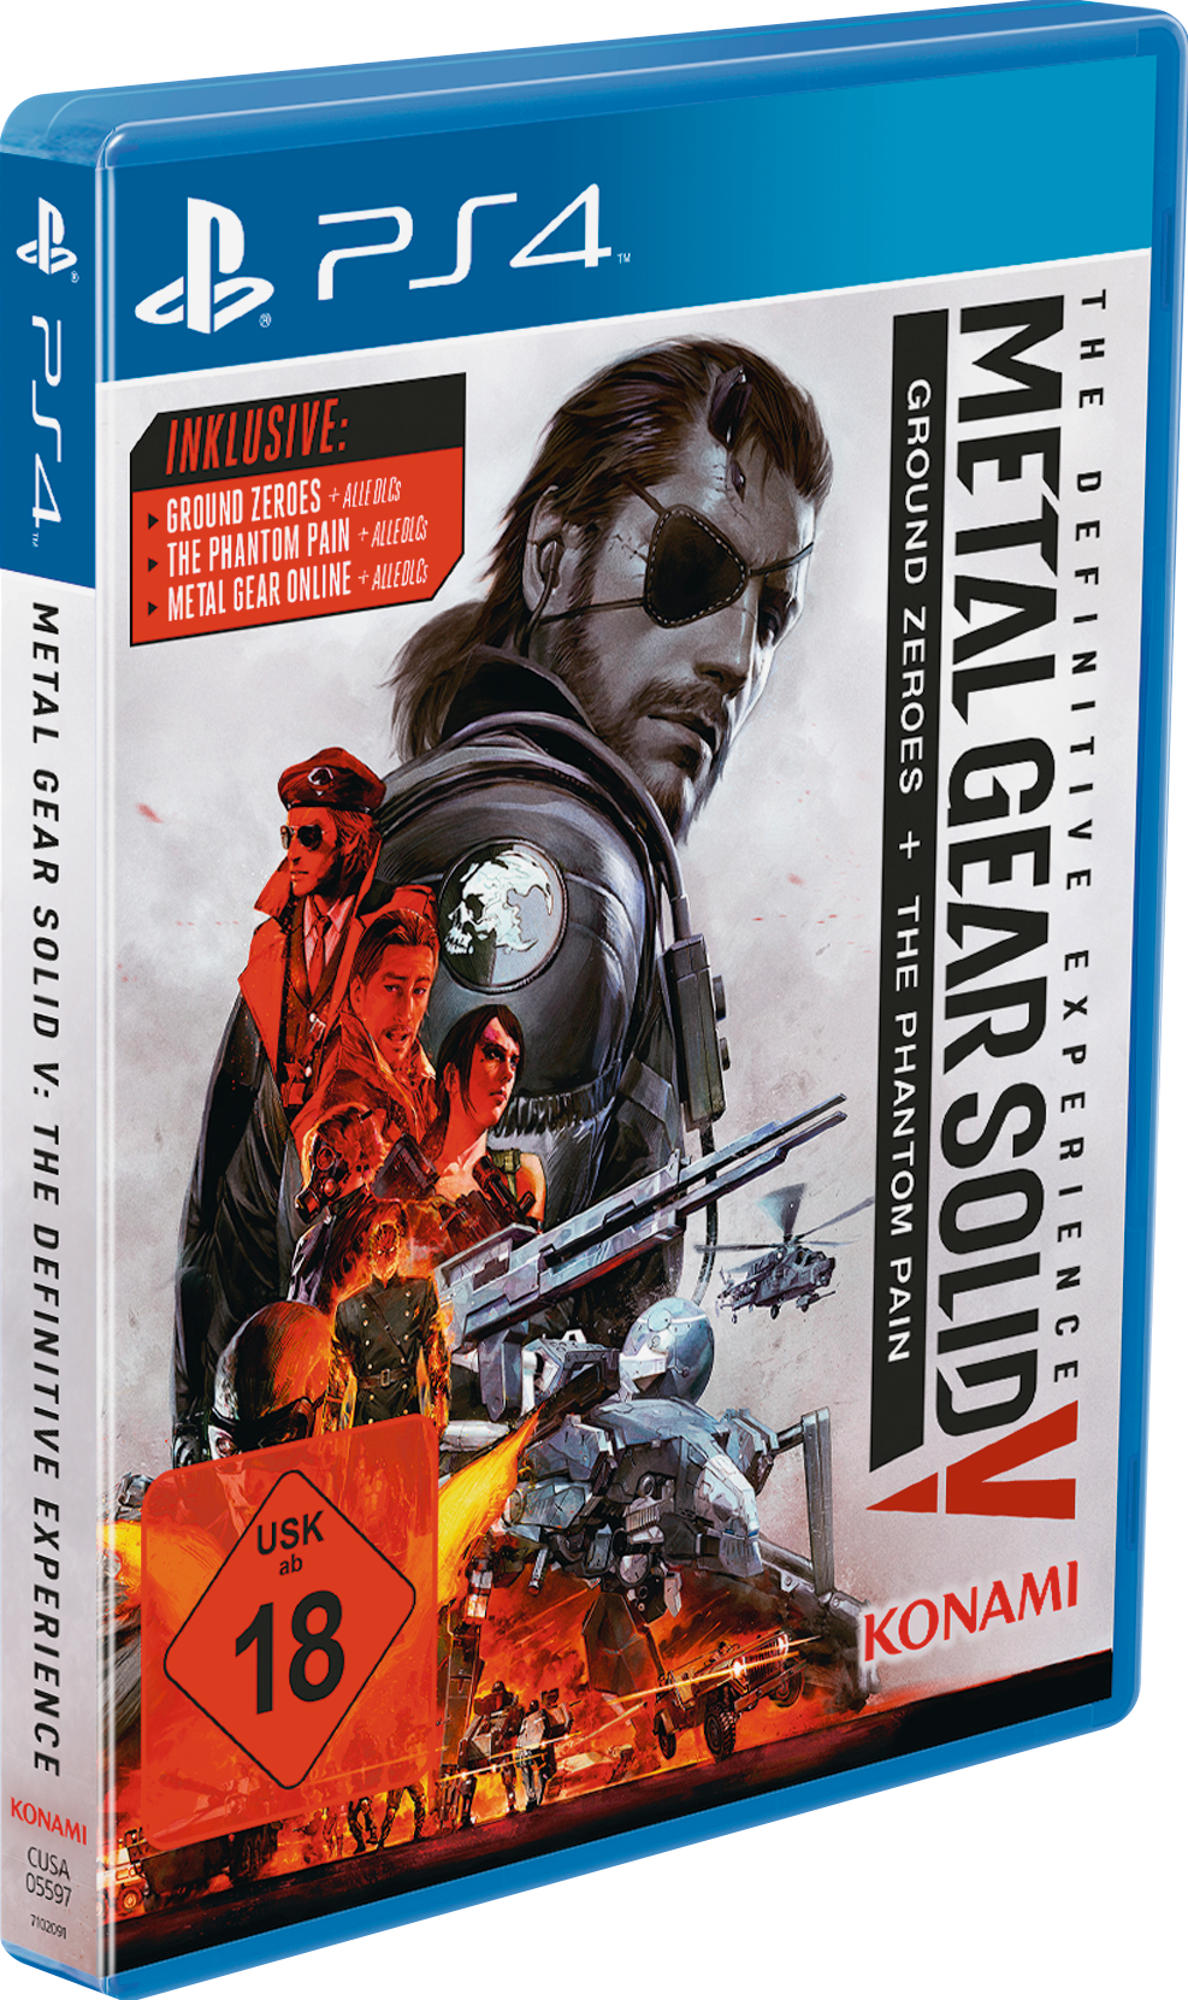 Solid Metal - Gear [PlayStation 5 4] The Definitive Edition -